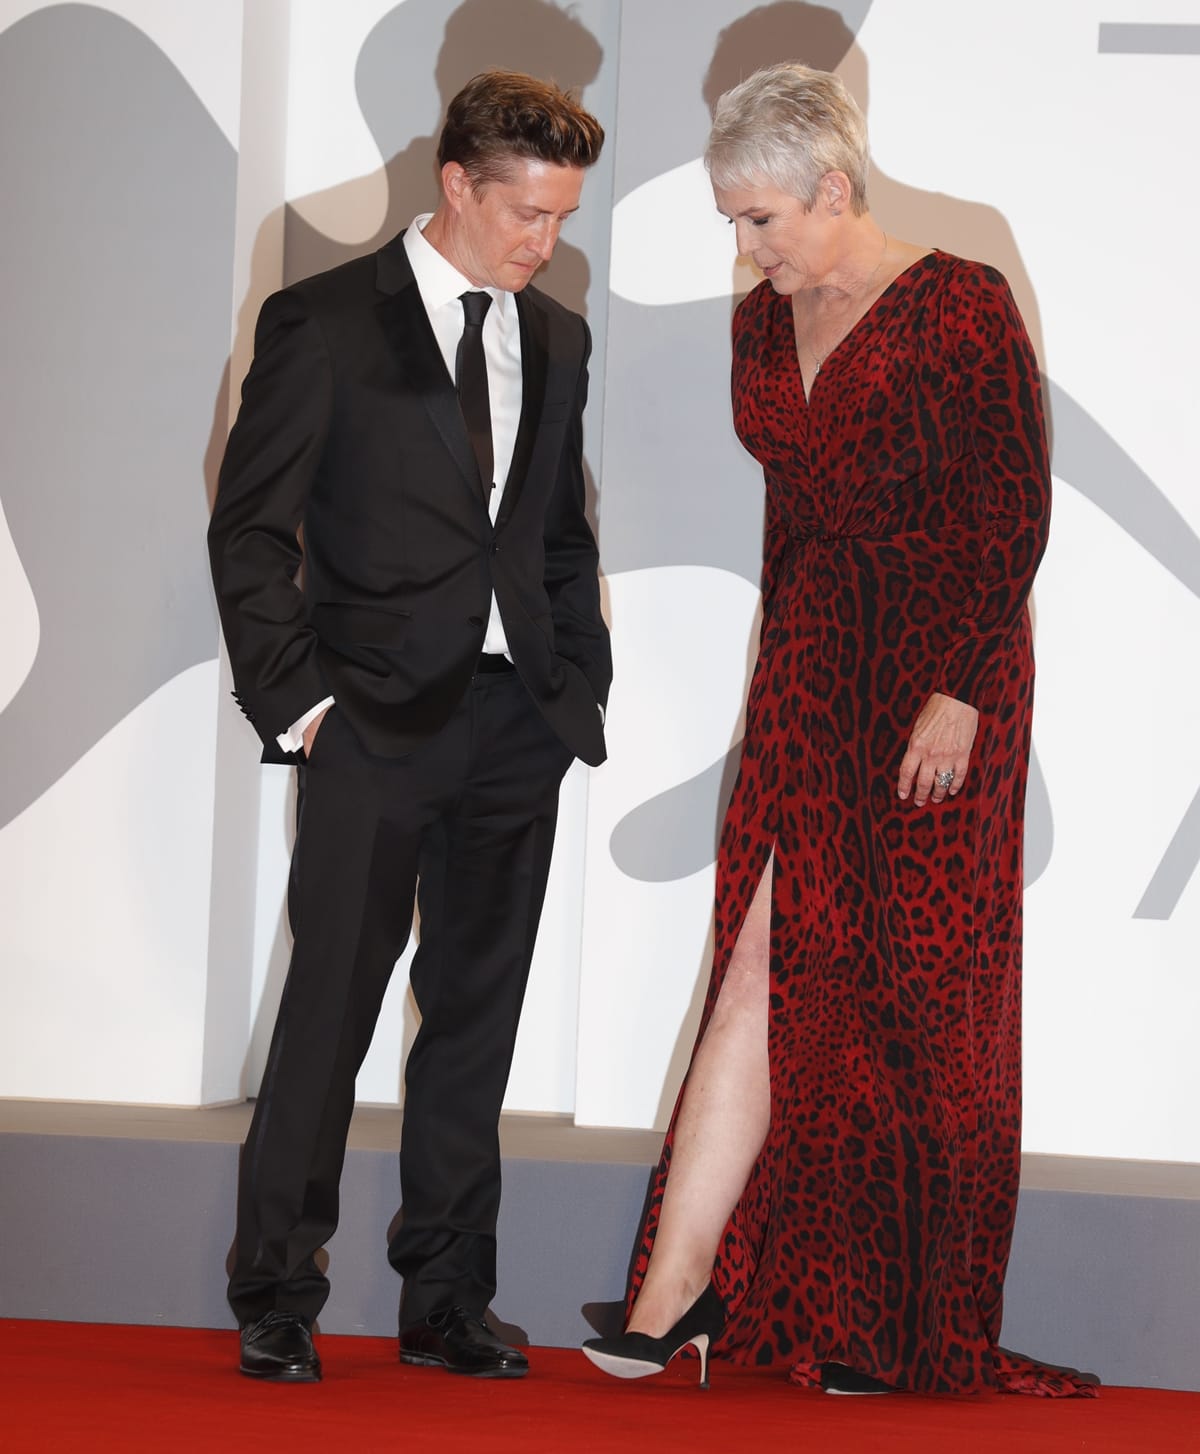 Director David Gordon Green and Jamie Lee Curtis compare shoes on the red carpet of the movie "Halloween Kills"